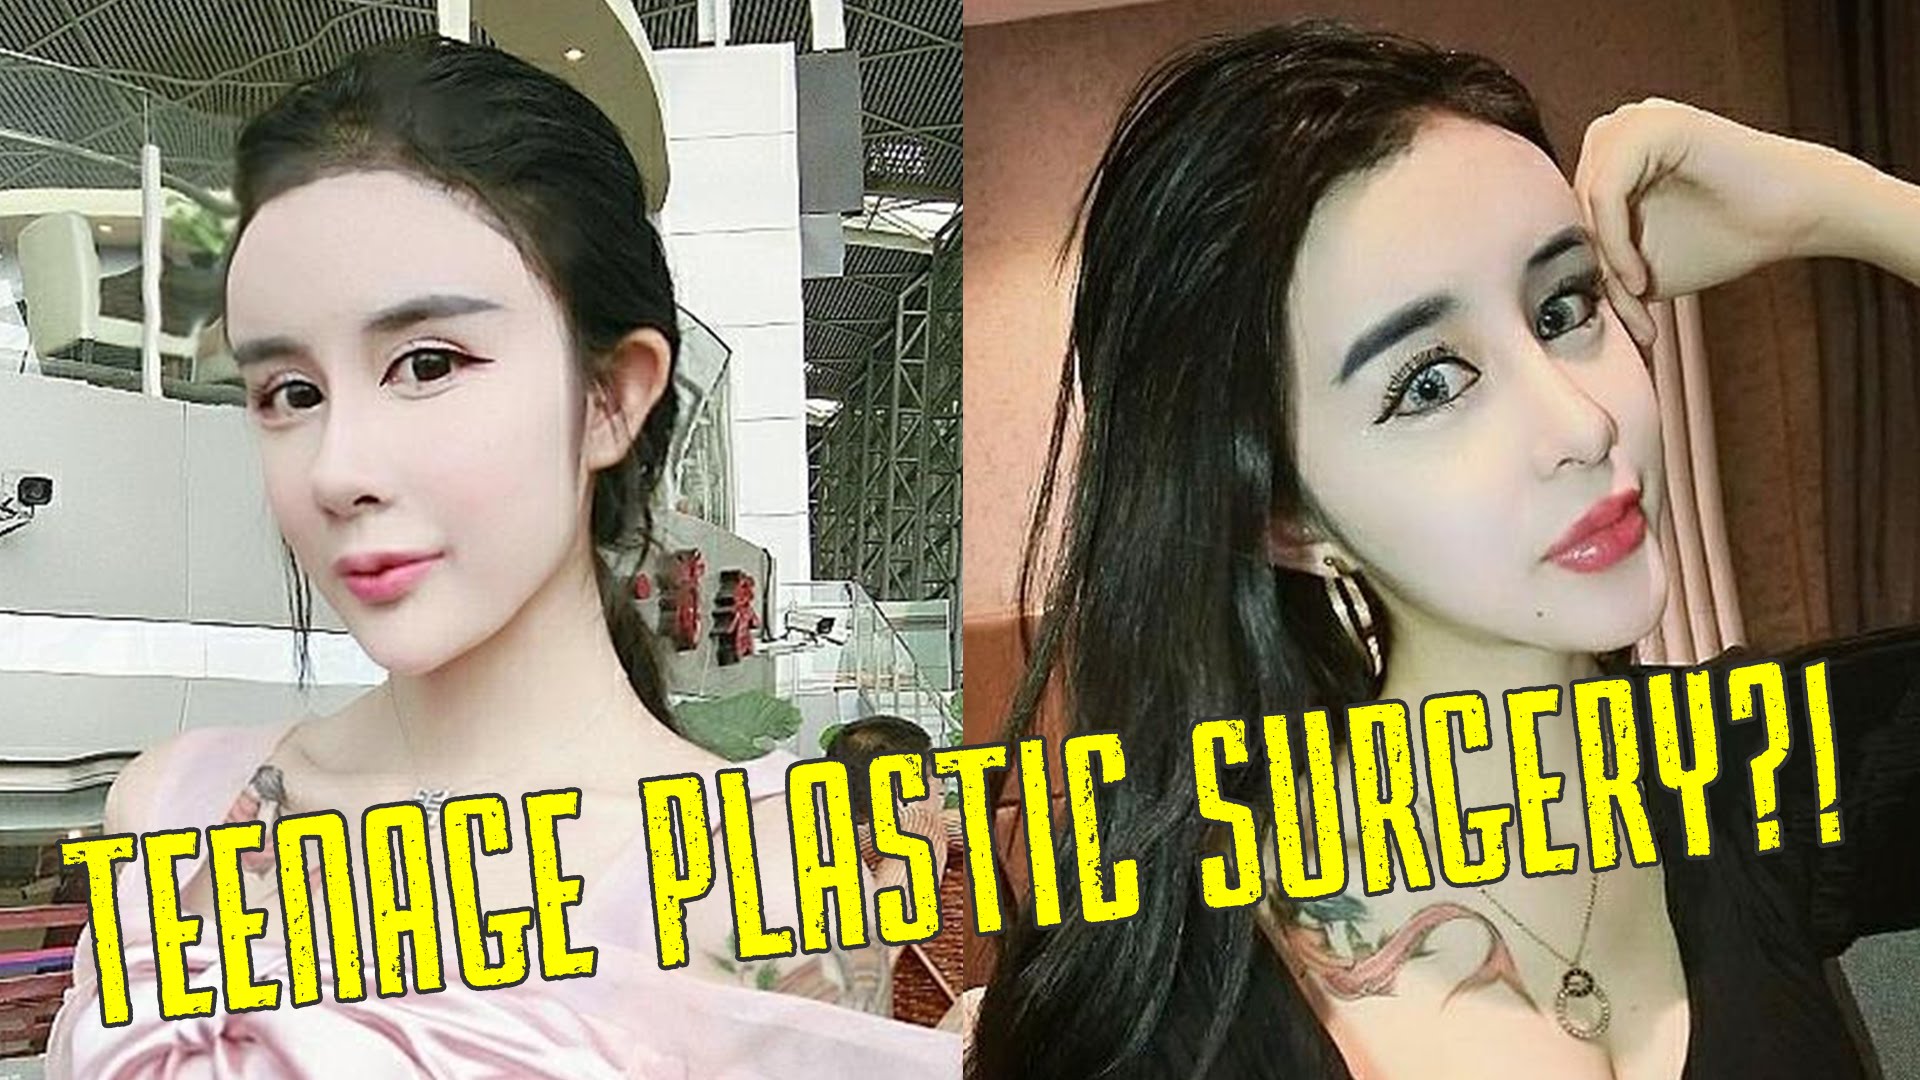 15 Yr Old Girl Gets Plastic Surgery To Look Fake